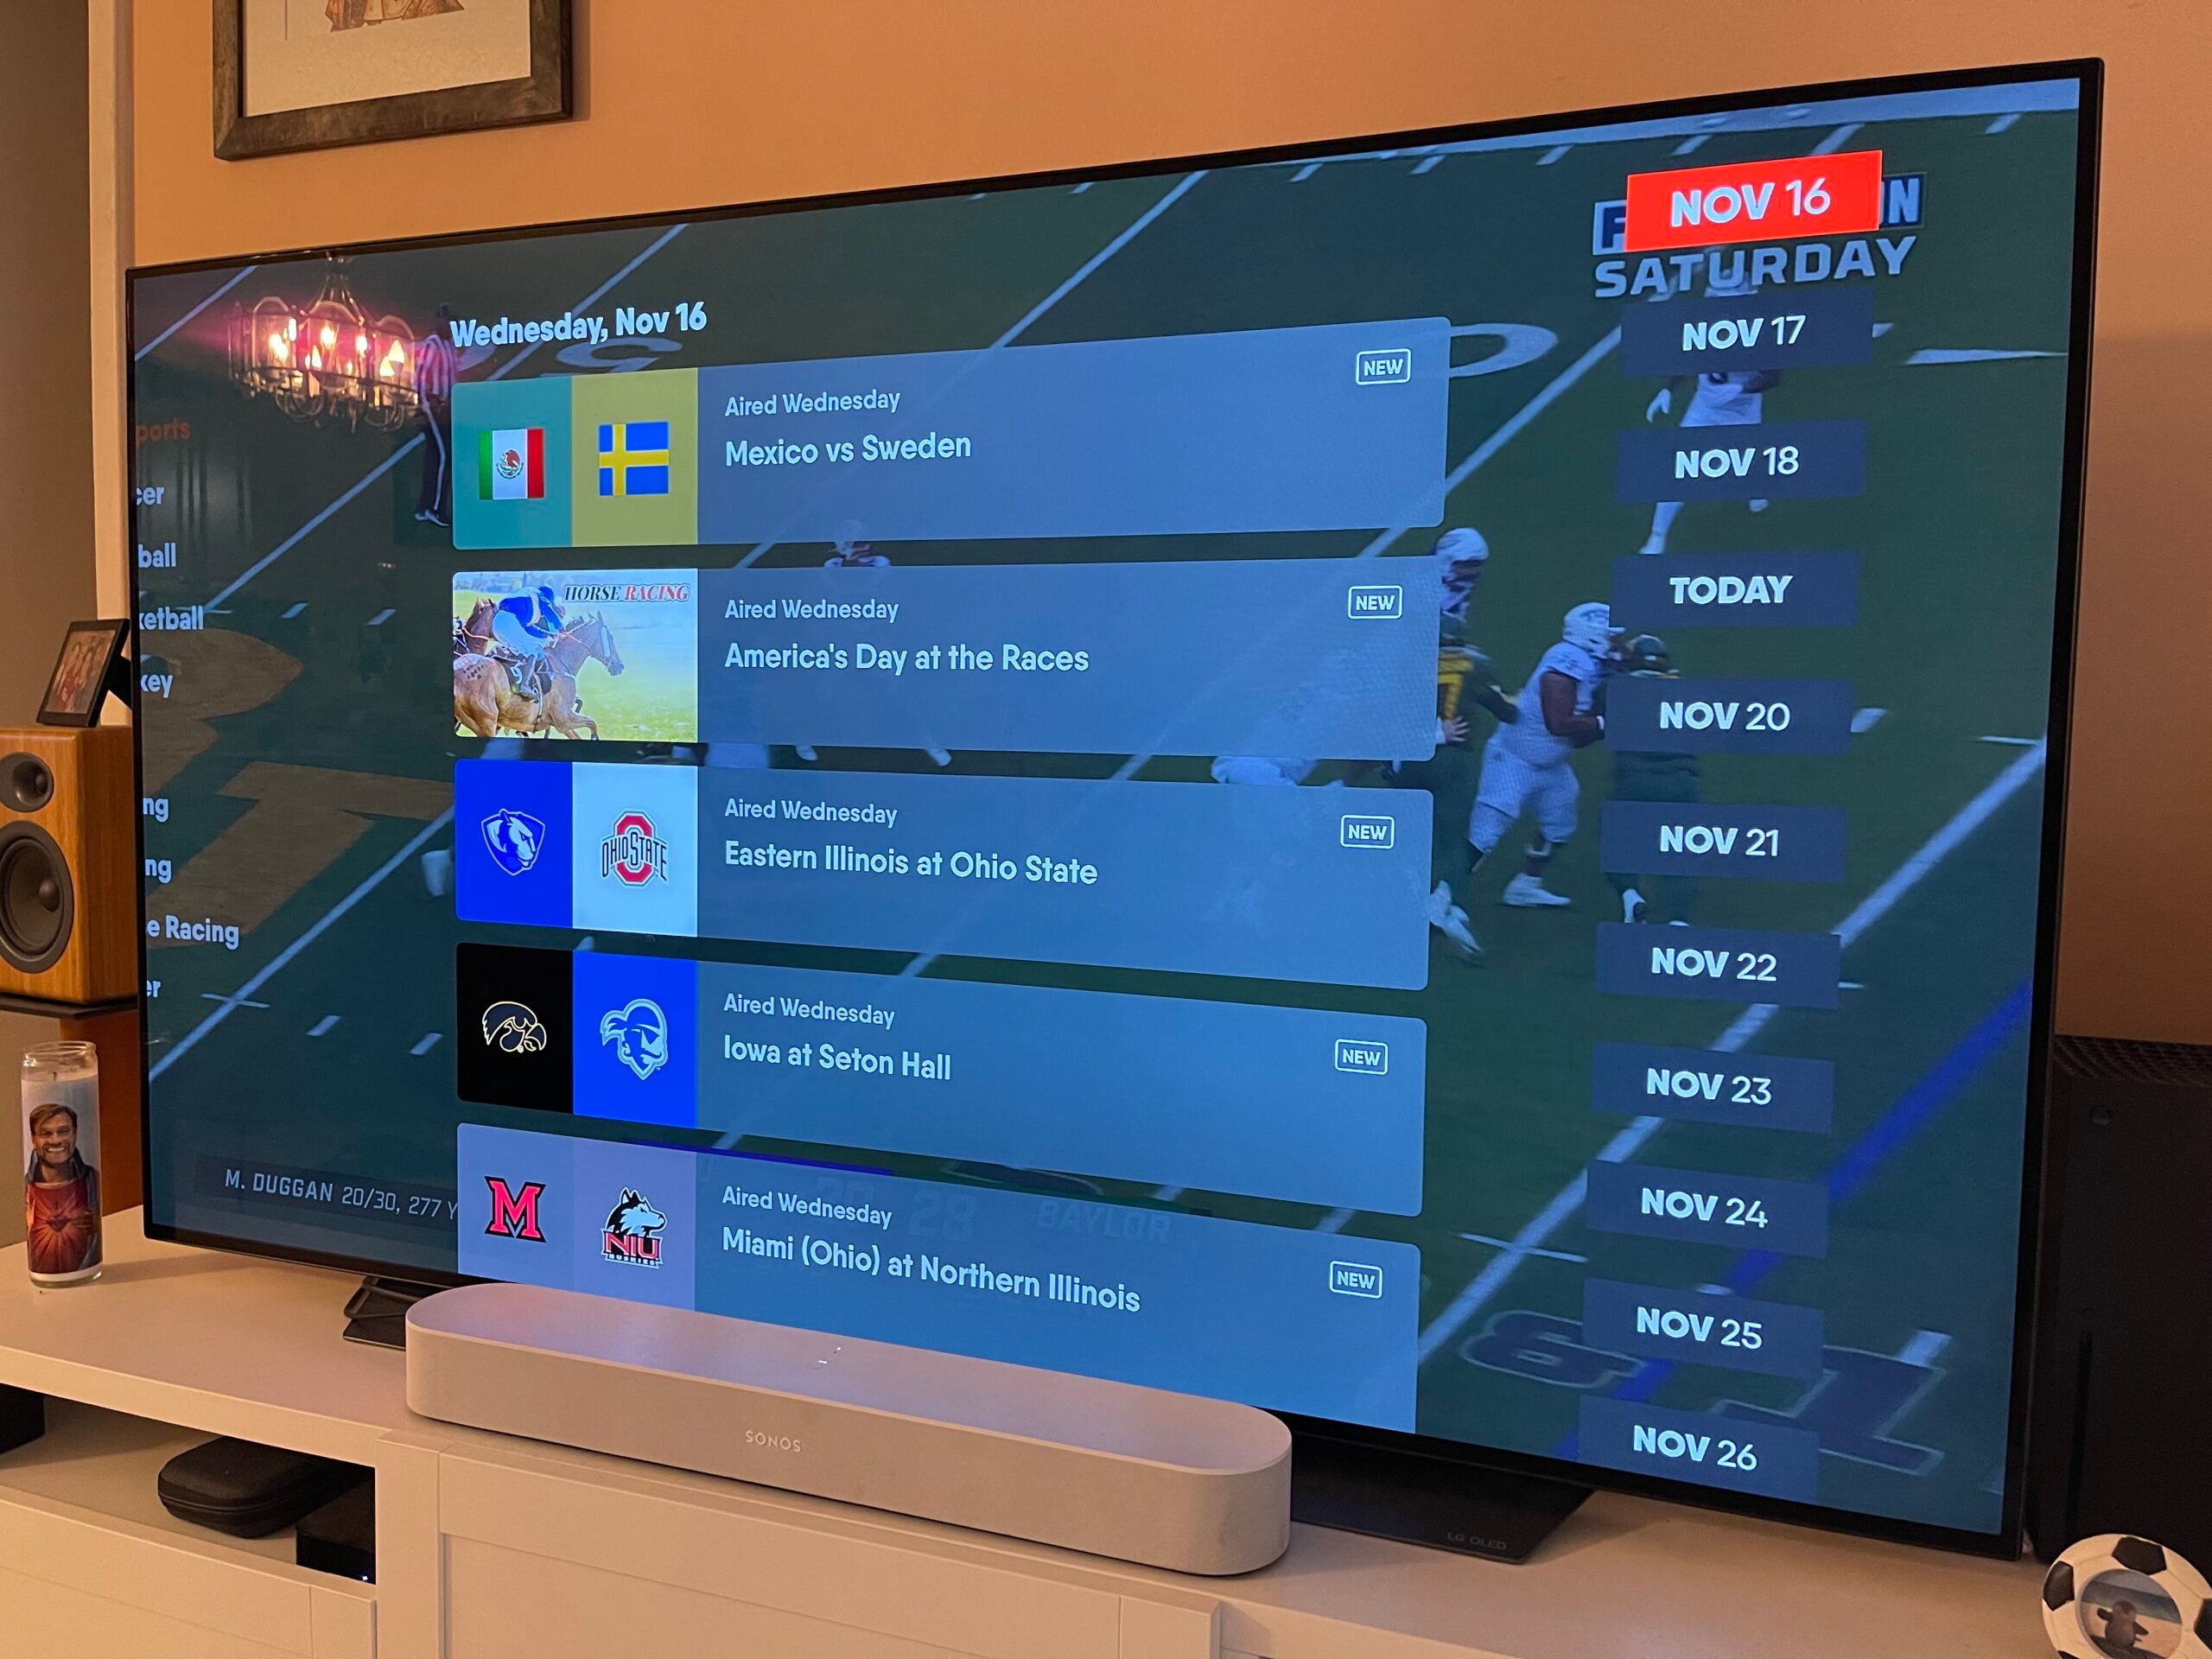 How to Watch Bally Sports on Samsung Smart Tv?